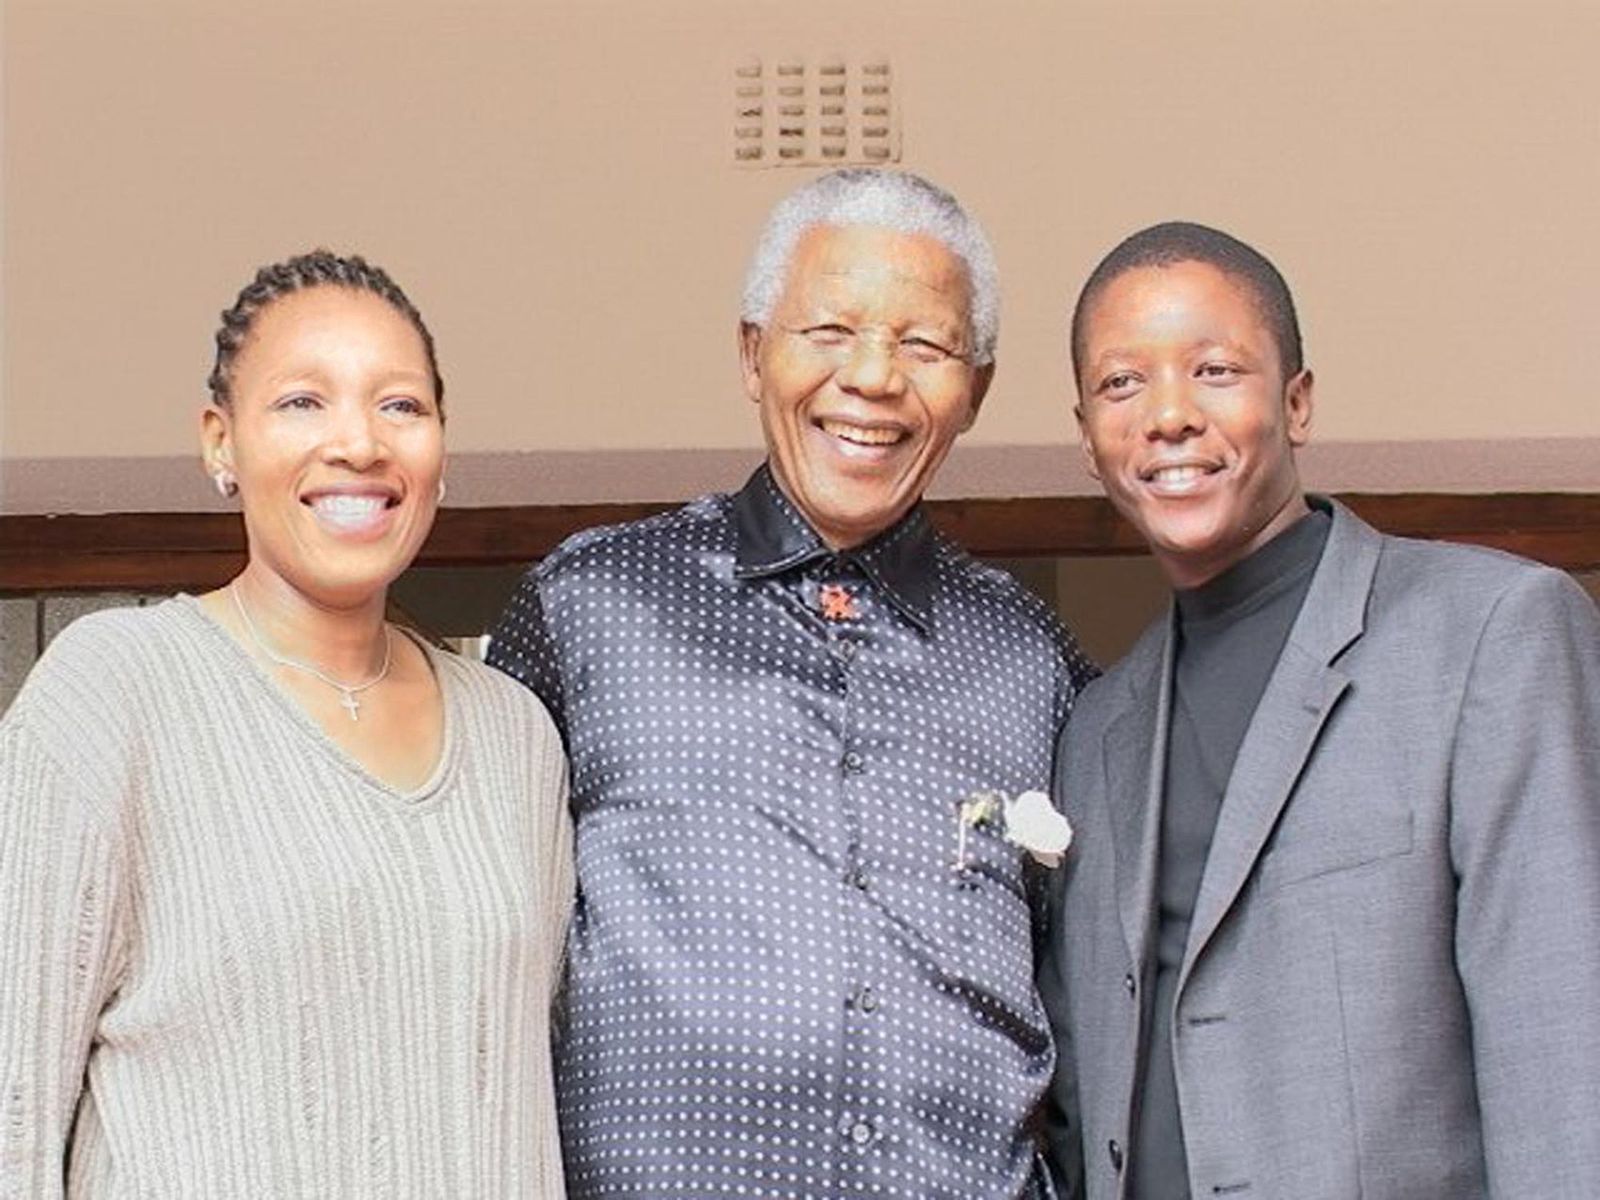 <p>Mandela (shown here with his daughter Zenani and one of his grandsons) chose not to seek a second term as president, <a href="https://www.cnn.com/2013/12/05/world/africa/nelson-mandela-retirement-years/index.html" rel="noreferrer noopener">preferring to devote himself to his family</a>. He continued for several years, however, to carry out diplomatic missions and <a href="https://www.borgenmagazine.com/nelson-mandelas-charity-work/" rel="noreferrer noopener">participate in charitable work</a>, namely the fight against poverty and AIDS. Despite mixed results at the close of his presidency, the enormity of his task earned him veneration as <a href="https://www.history.com/topics/africa/nelson-mandela" rel="noreferrer noopener">one of</a> Africa<a href="https://www.history.com/topics/africa/nelson-mandela" rel="noreferrer noopener">’</a>s wisest men.</p>